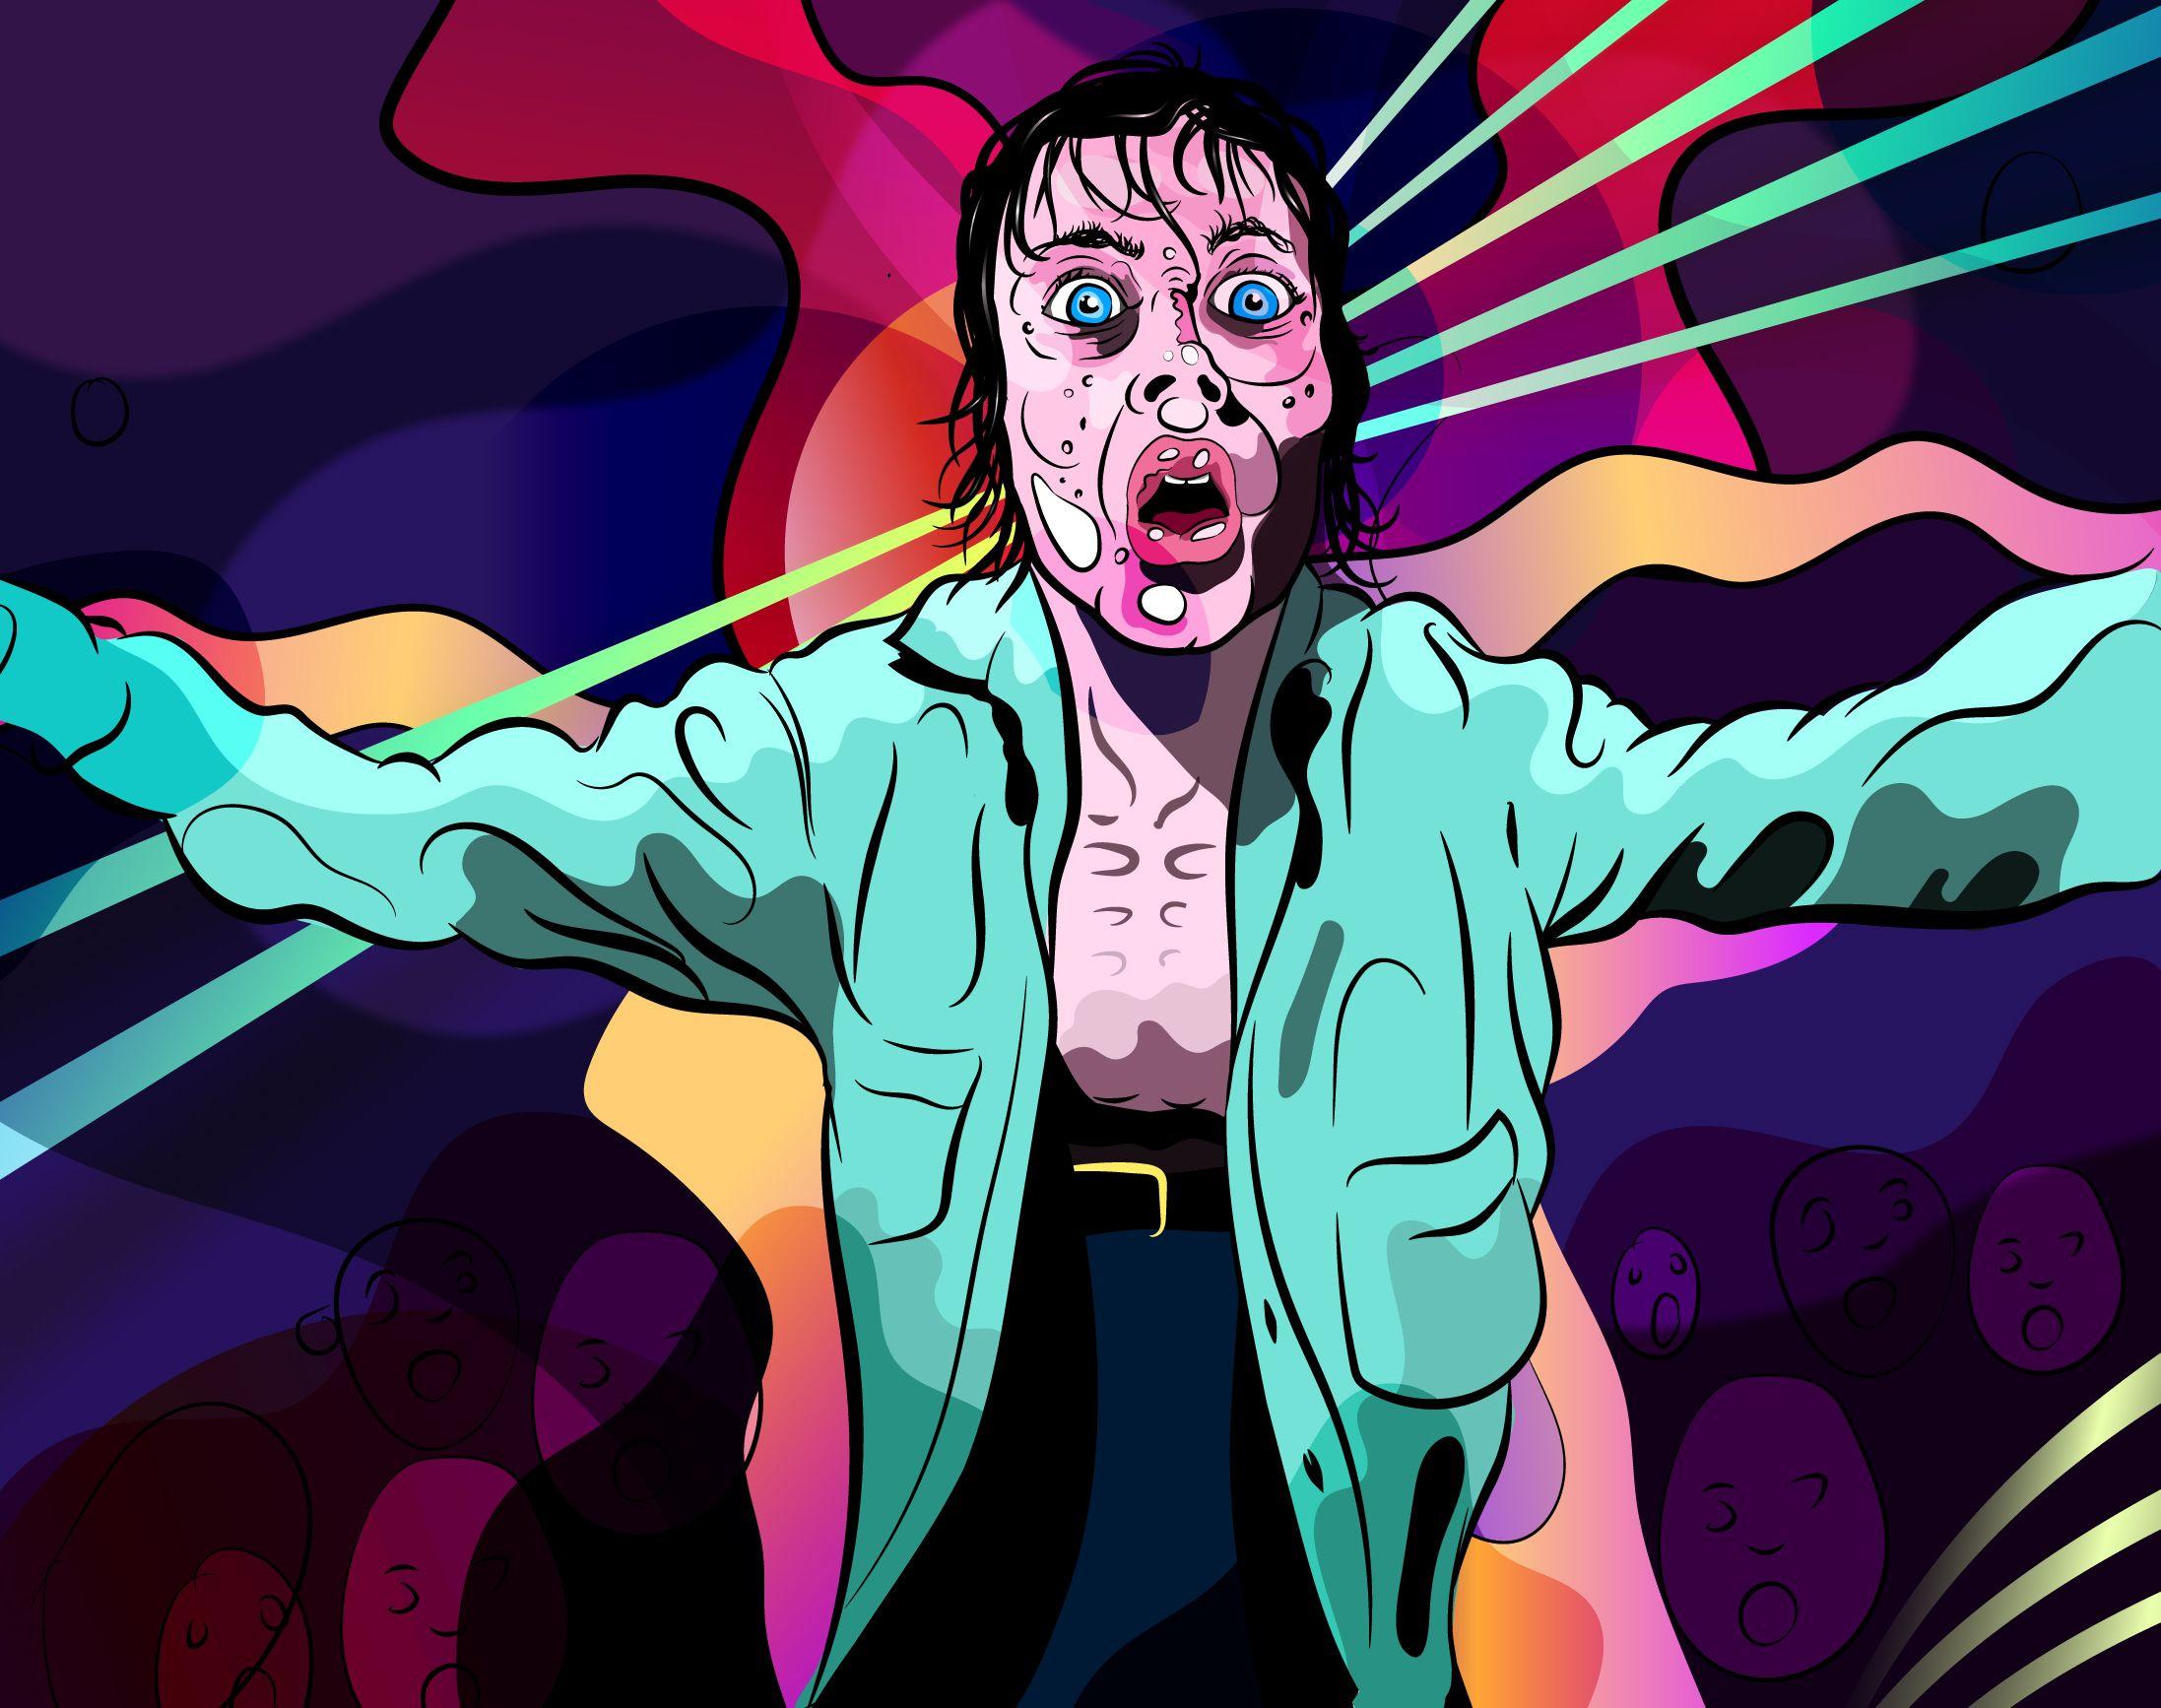 Digital art illustration of a young man in a nightclub staring, eyes wide open and staring at the camera. His shirt is undone, and he is sweating, but clearly enjoying the music. The illustration uses bold vector graphics and vibrant colours 